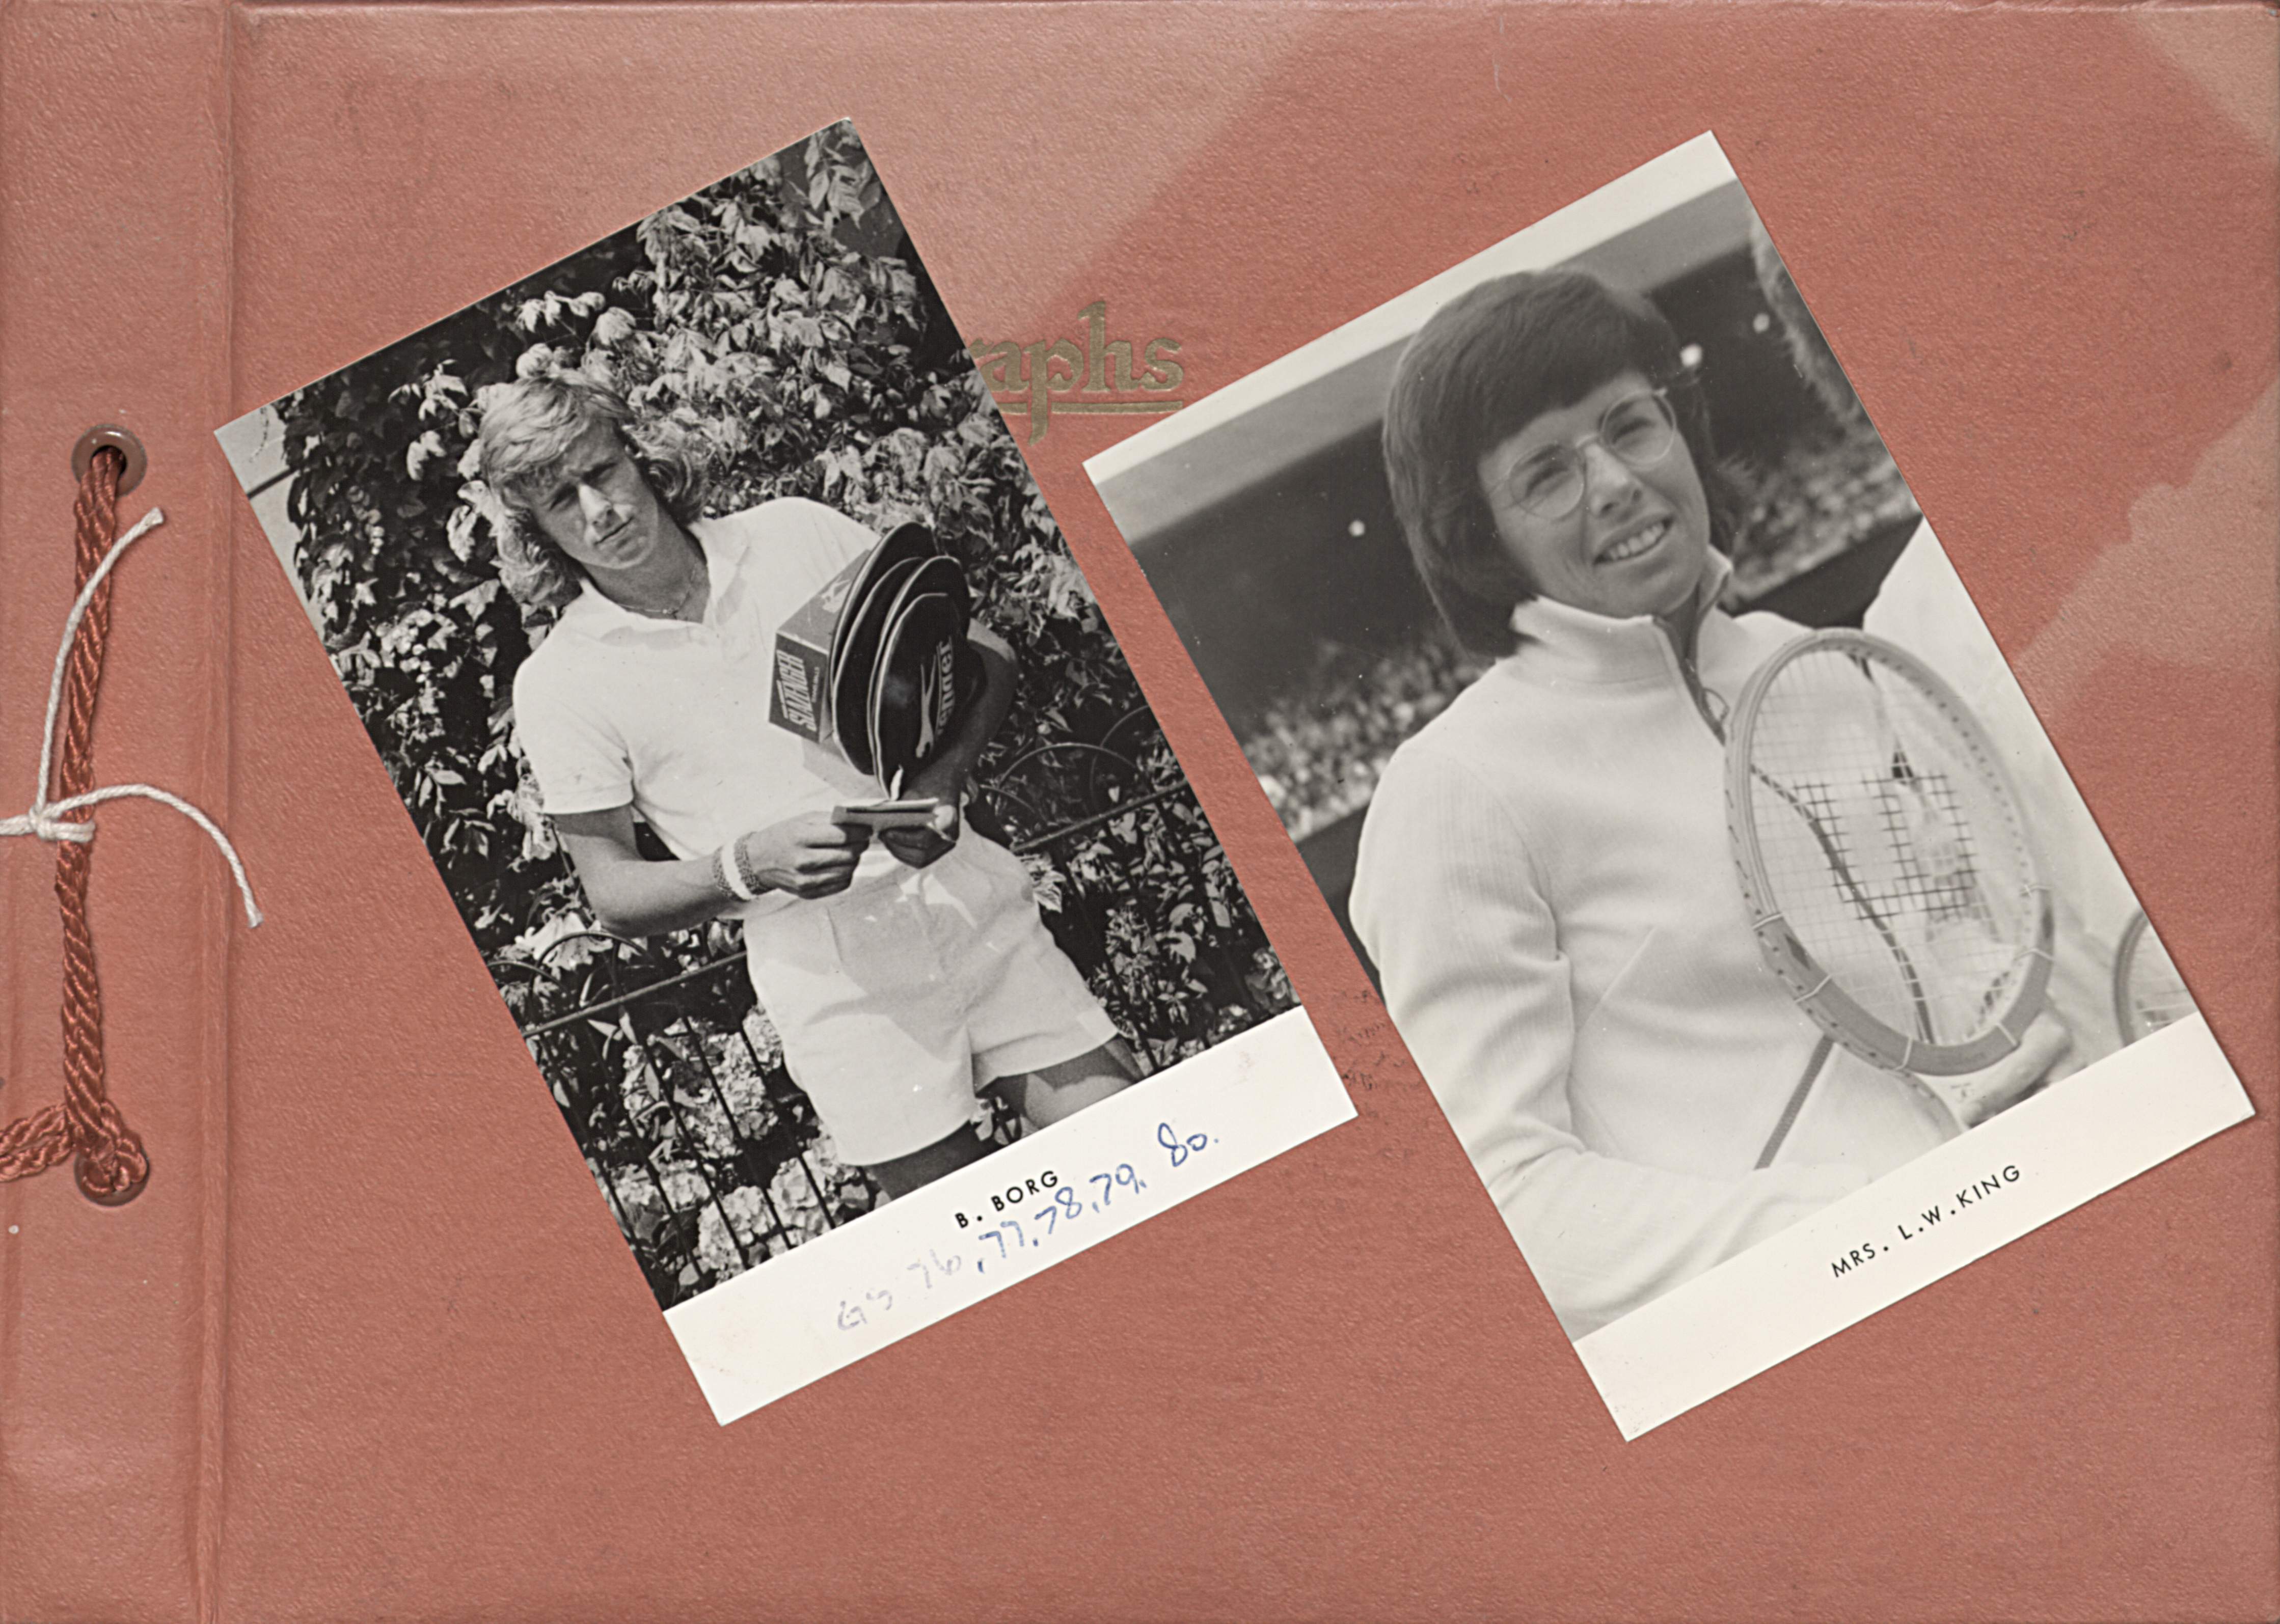 Photographs of Tennis Players from 60s/70s